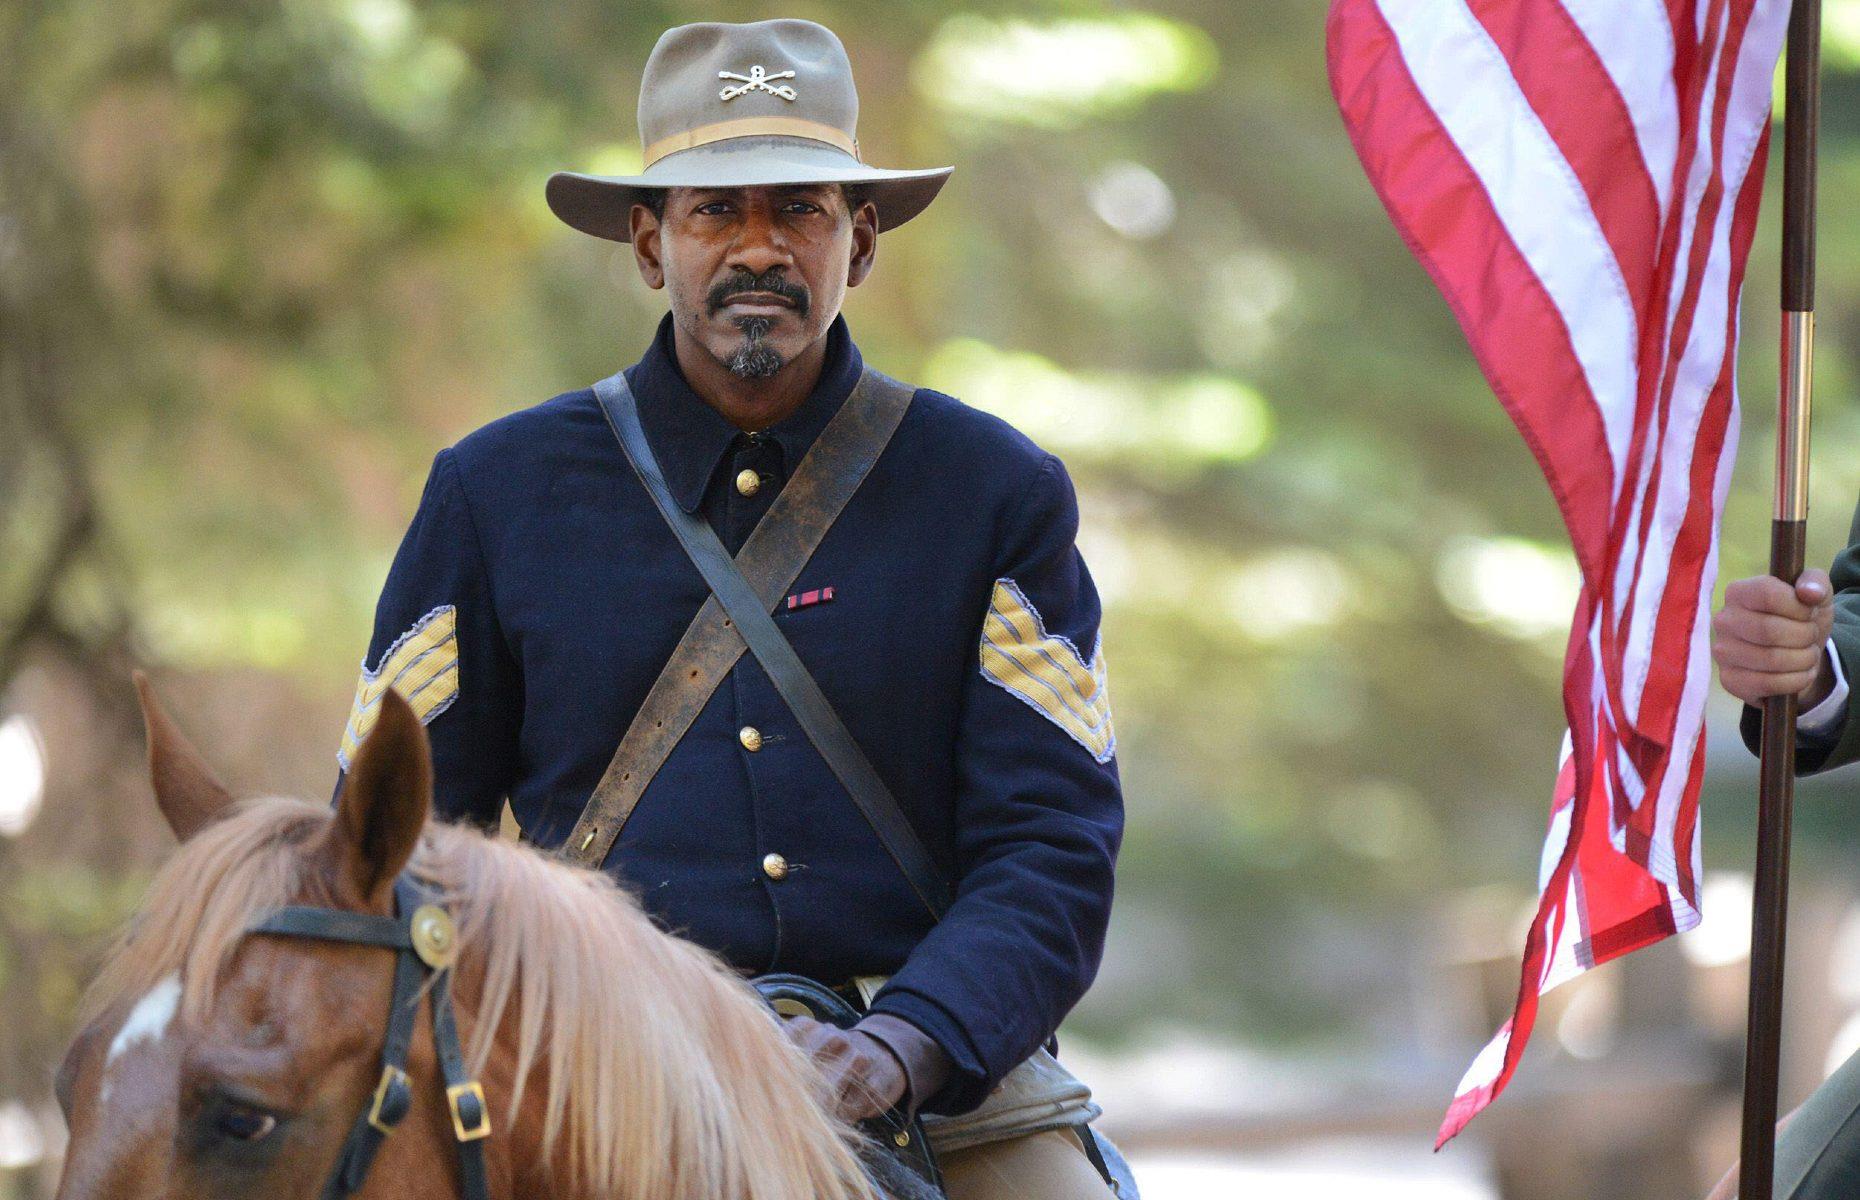 <p>Before the emergence of America’s National Park Service (NPS) in 1916, looking after Yosemite fell to the military, often to so-called buffalo soldiers. These men were African-American veterans of the Spanish-American War who, while serving overseas in rainy conditions, had learned to pinch their domed, wide-brimmed hats into symmetrical quadrants to keep water out of their faces. This 'Montana Peak' style continued when the soldiers began managing Yosemite, and was eventually incorporated into the official NPS ranger uniform. In this photo, Yosemite ranger Shelton Johnson wears the uniform of a buffalo soldier on the 150th anniversary of the Yosemite Grant.</p>